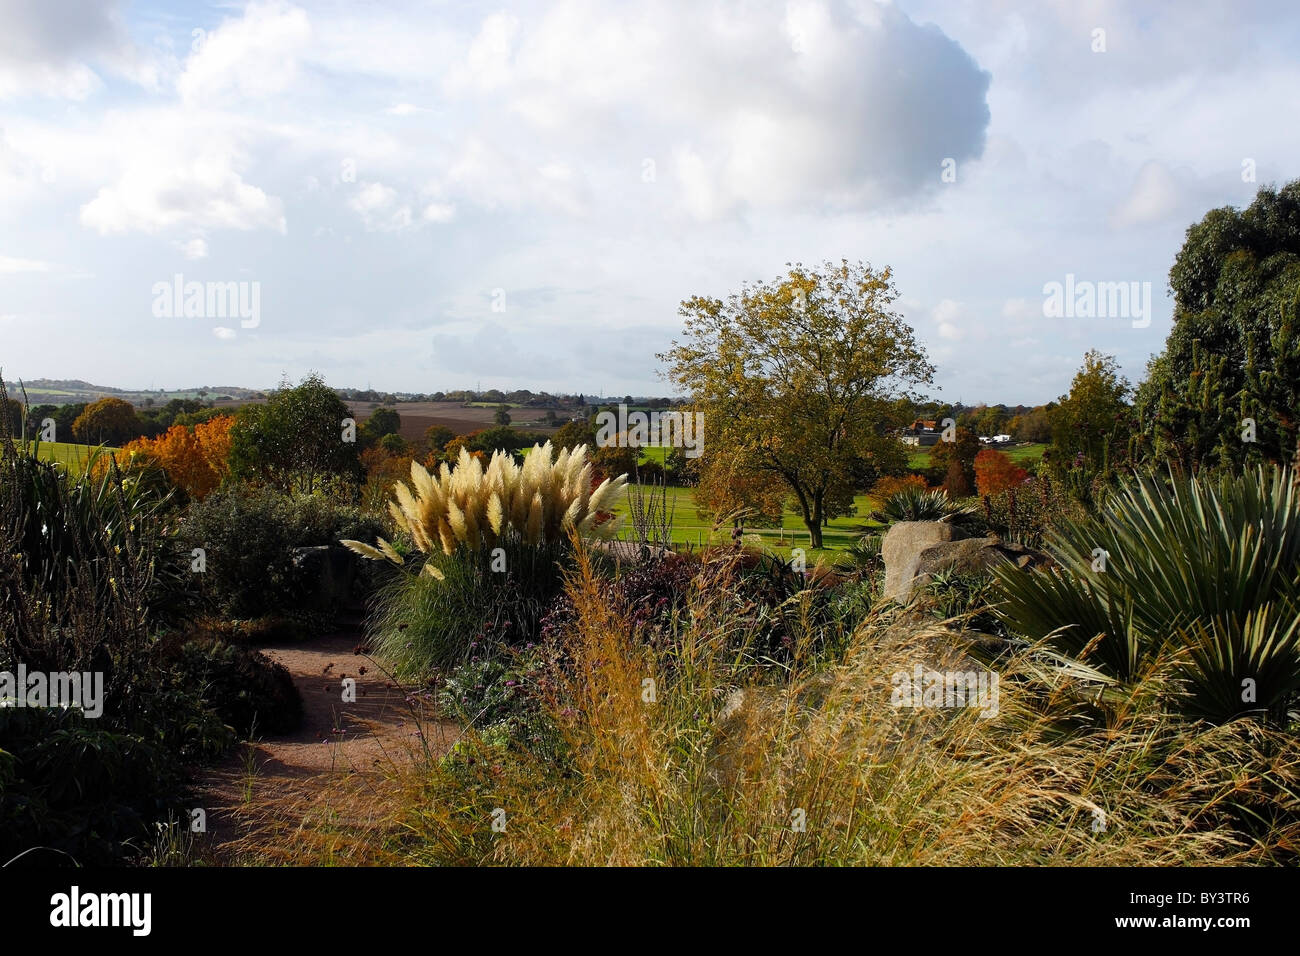 THE PICTURESQUE DRY GARDEN AT RHS HYDE HALL IN AUTUMN. Stock Photo